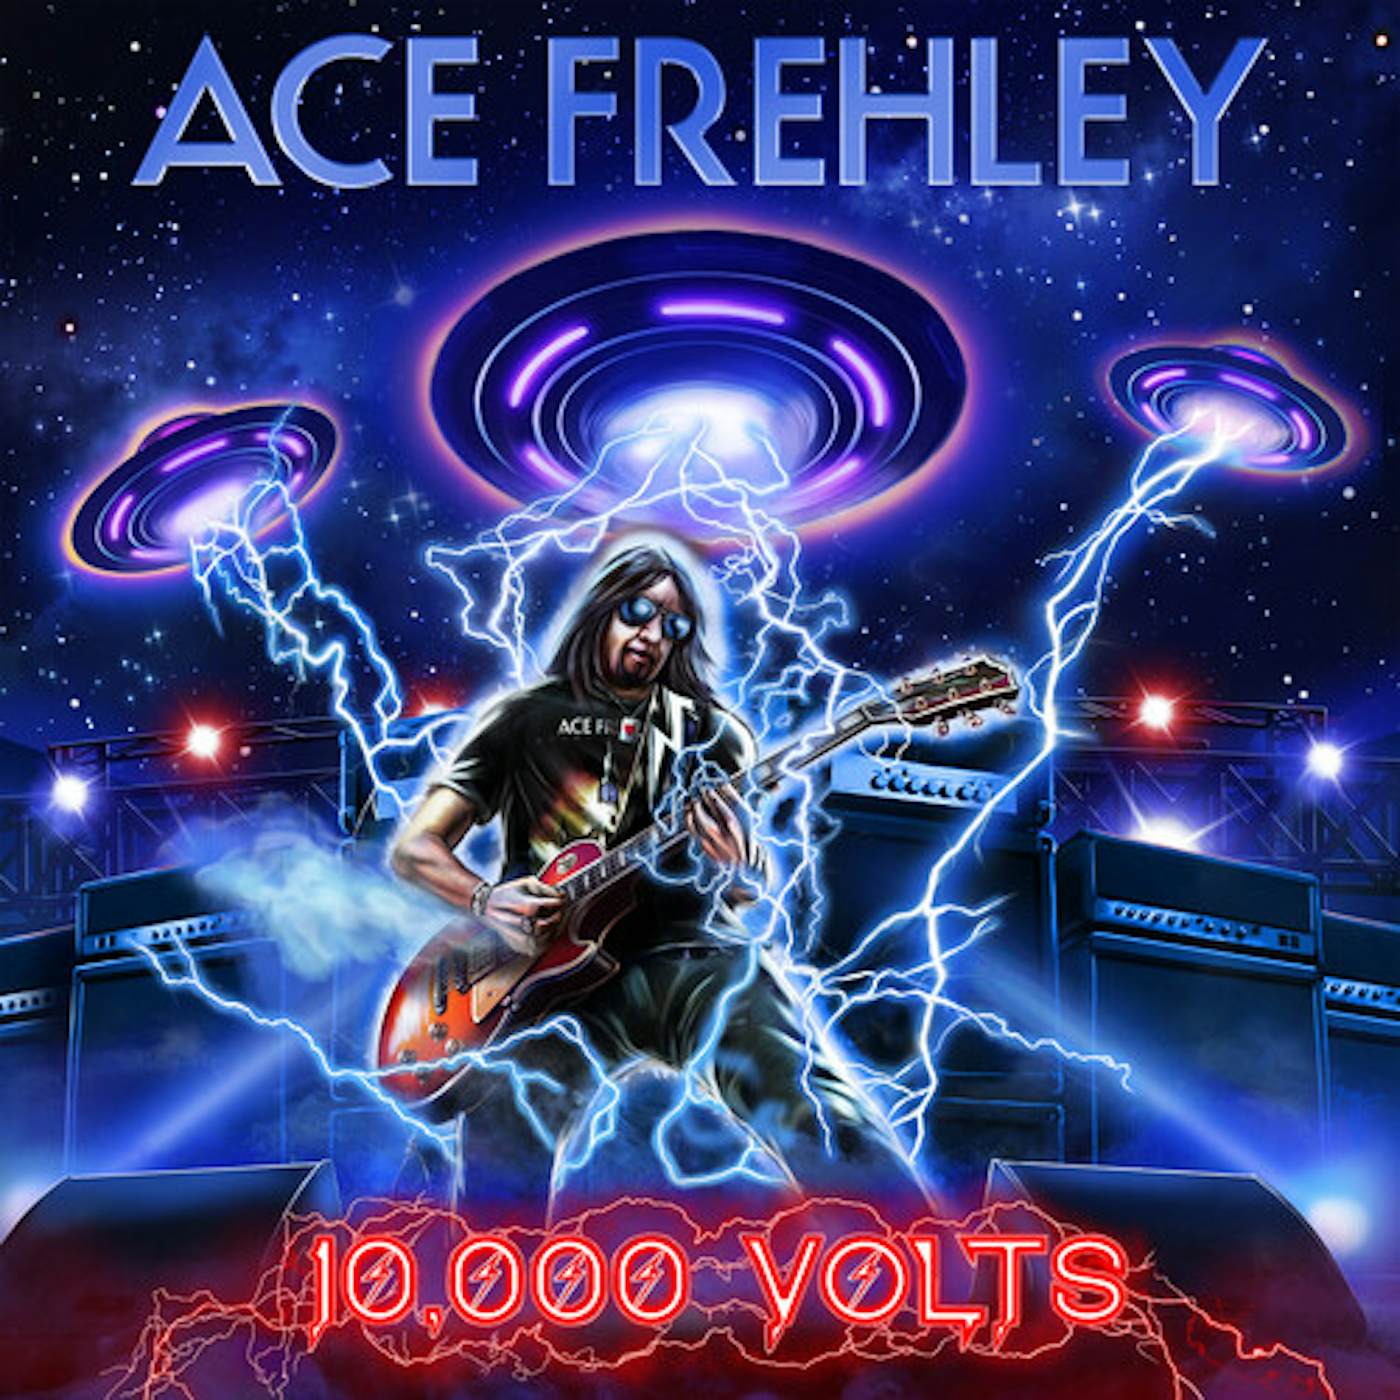 Ace Frehley 10000 VOLTS CD